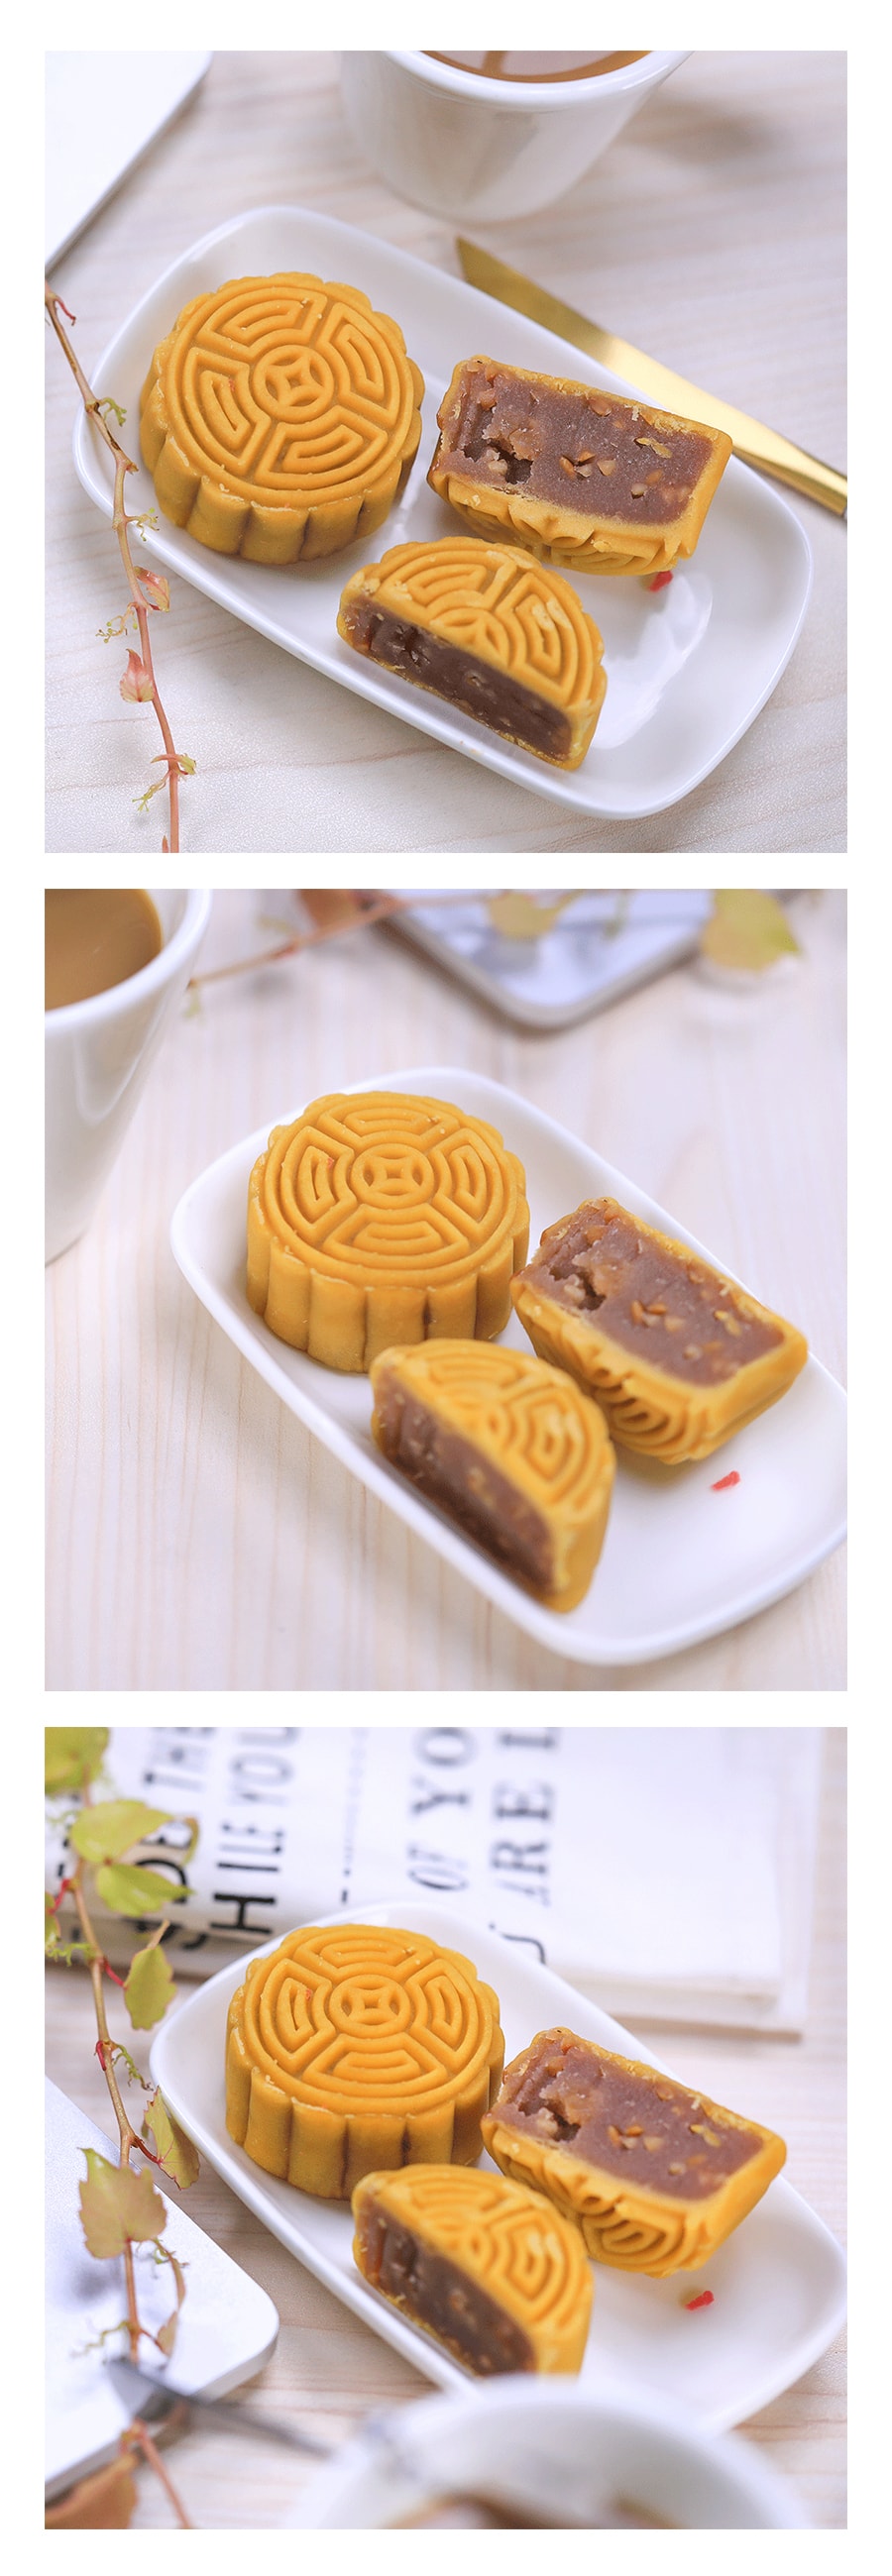 ONETANG Moon Cake Momoyama Style With Trao & Peanut 100g 【Delivery Date: Mid August】